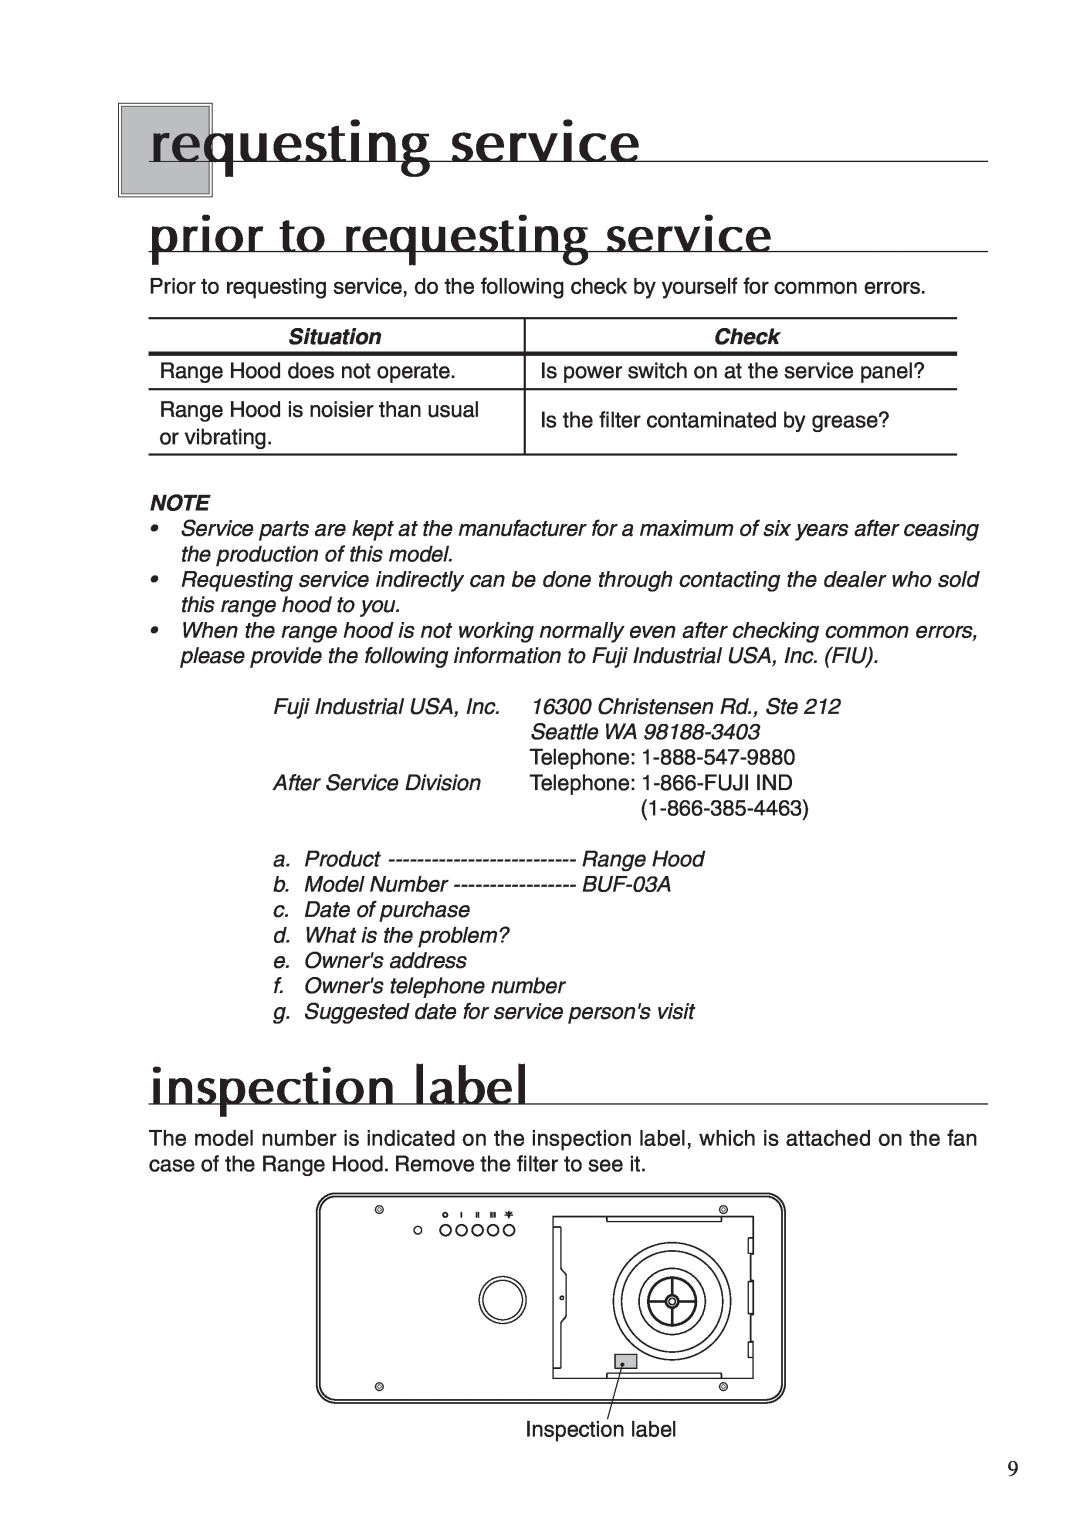 Fujioh BUF-03A operation manual prior to requesting service, inspection label, Situation, Check 